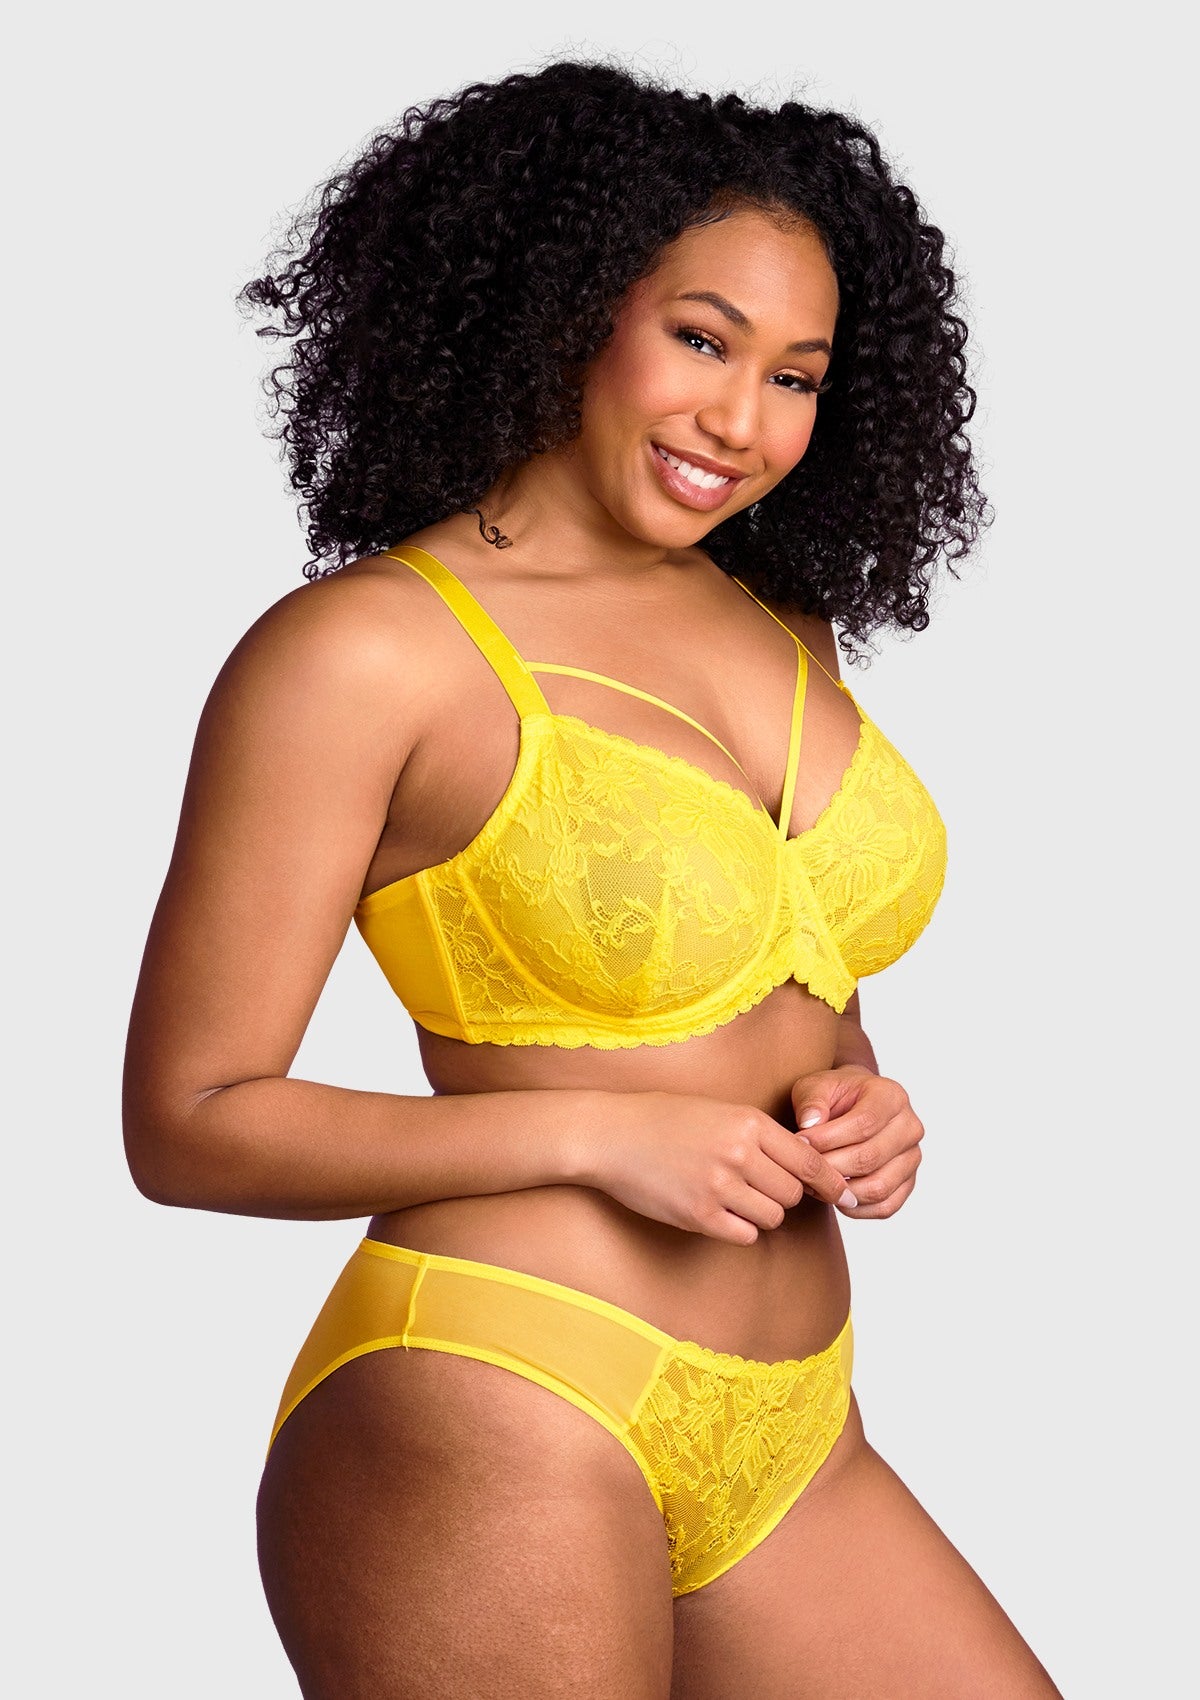 HSIA Unlined Lace Mesh Minimizer Bra For Large Breasts, Full Coverage - Bright Yellow / 38 / H